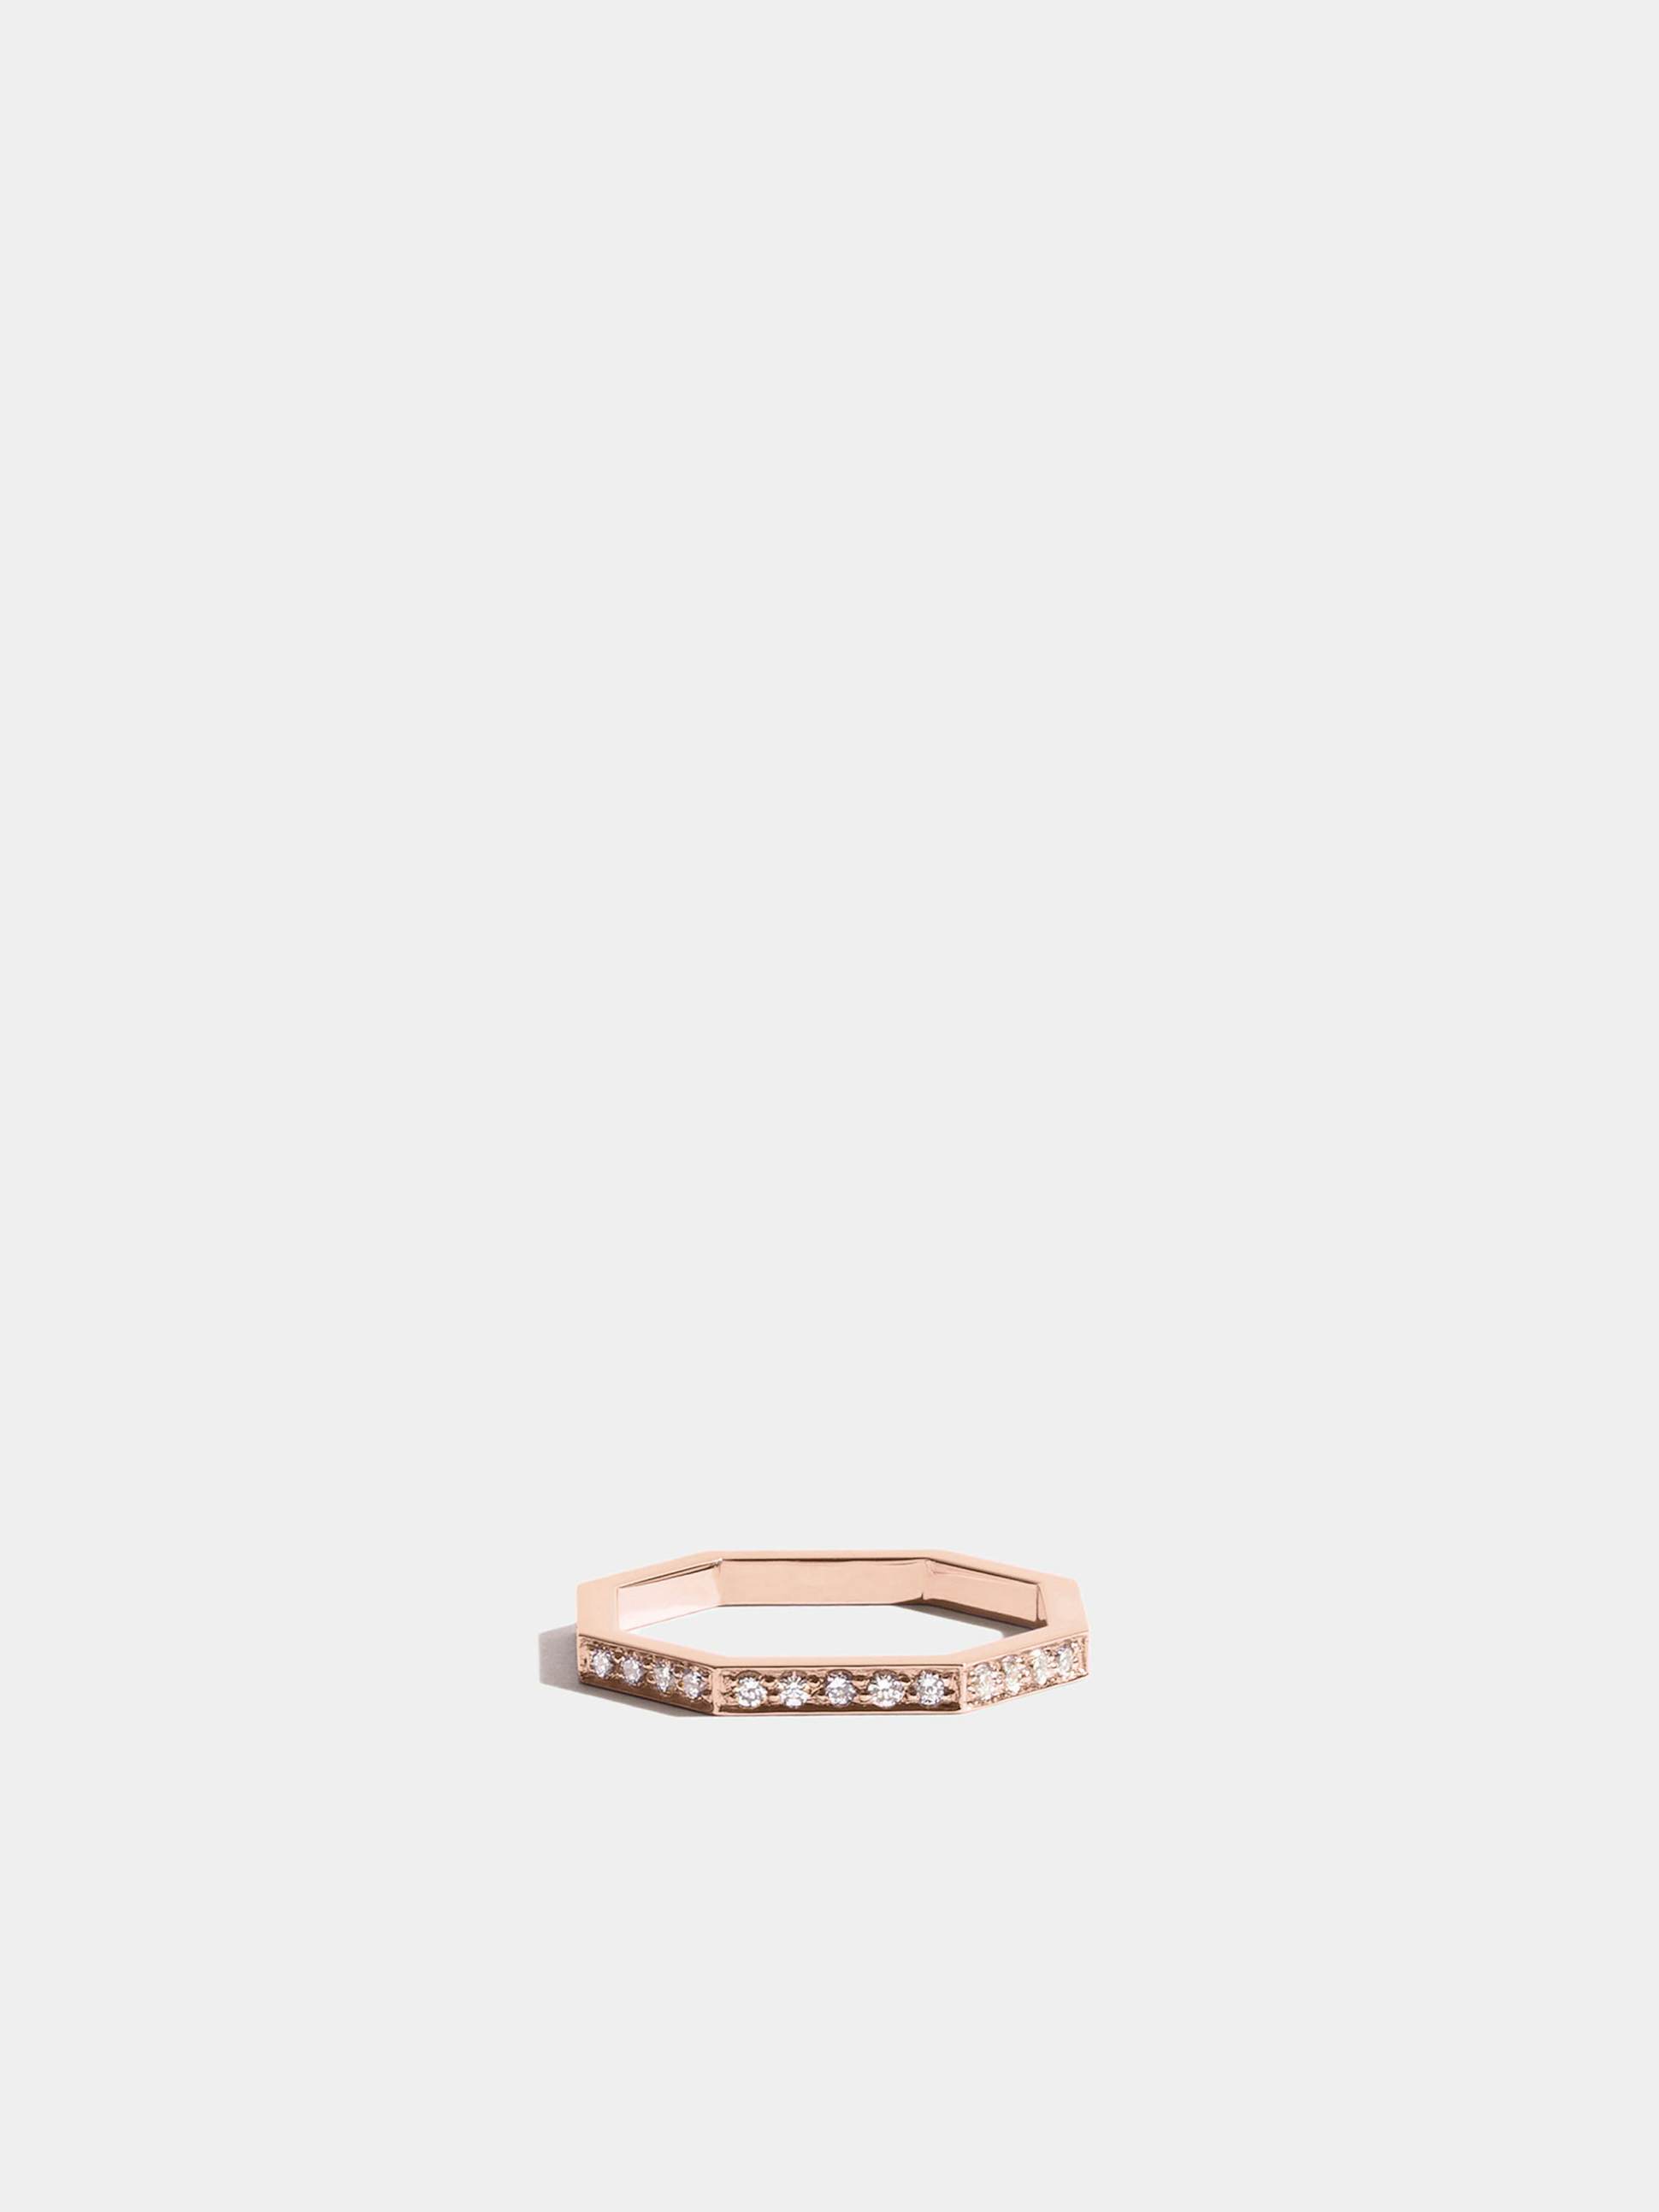 Octogone simple ring in 18k Fairmined ethical rose gold and paved with lab-grown diamonds